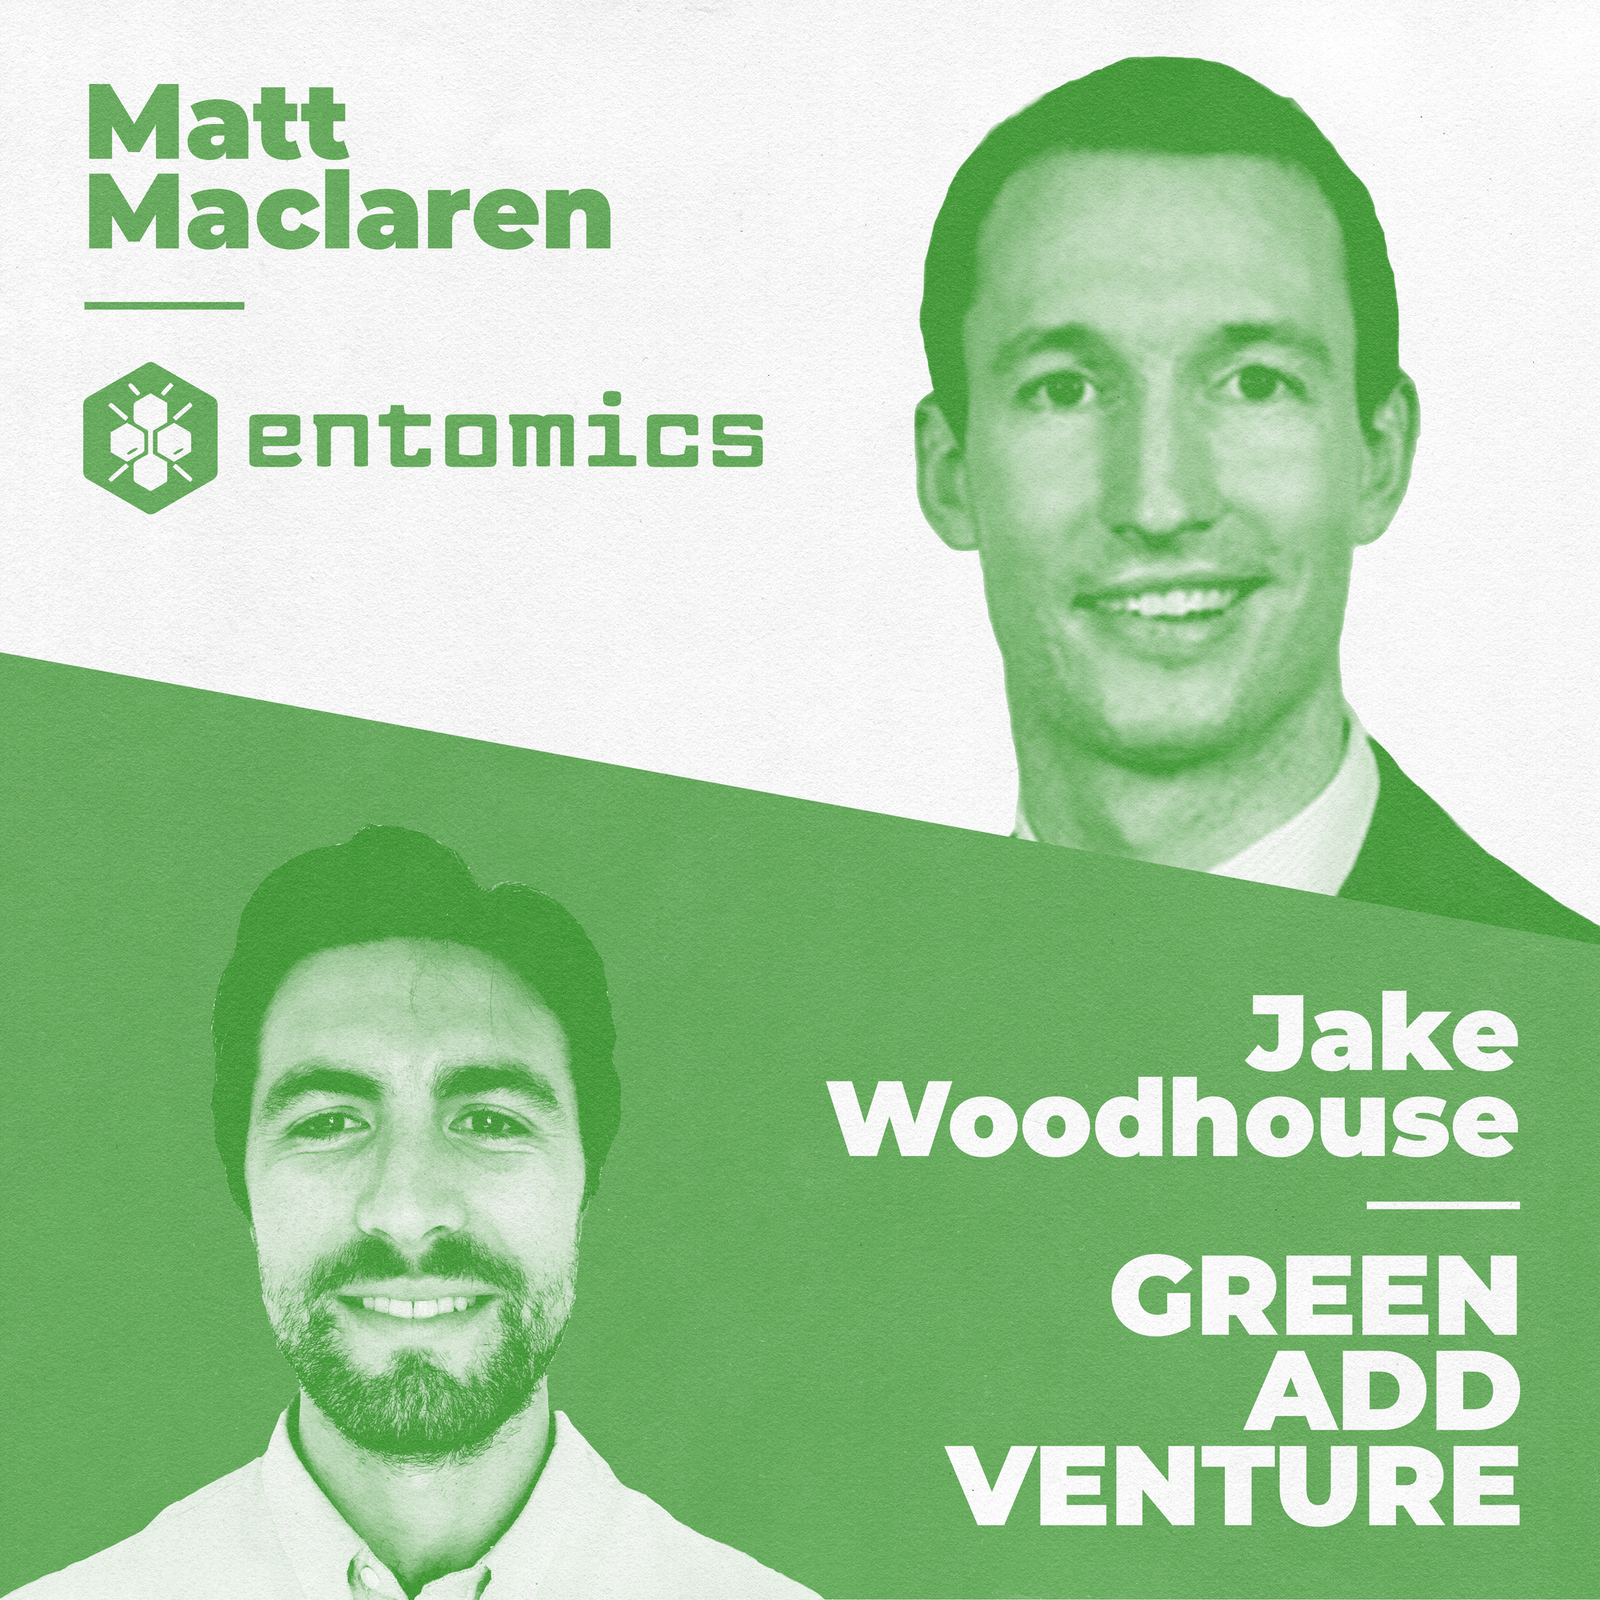 3: Matt Mclaren - Entomics - Addressing Food Waste With Insects